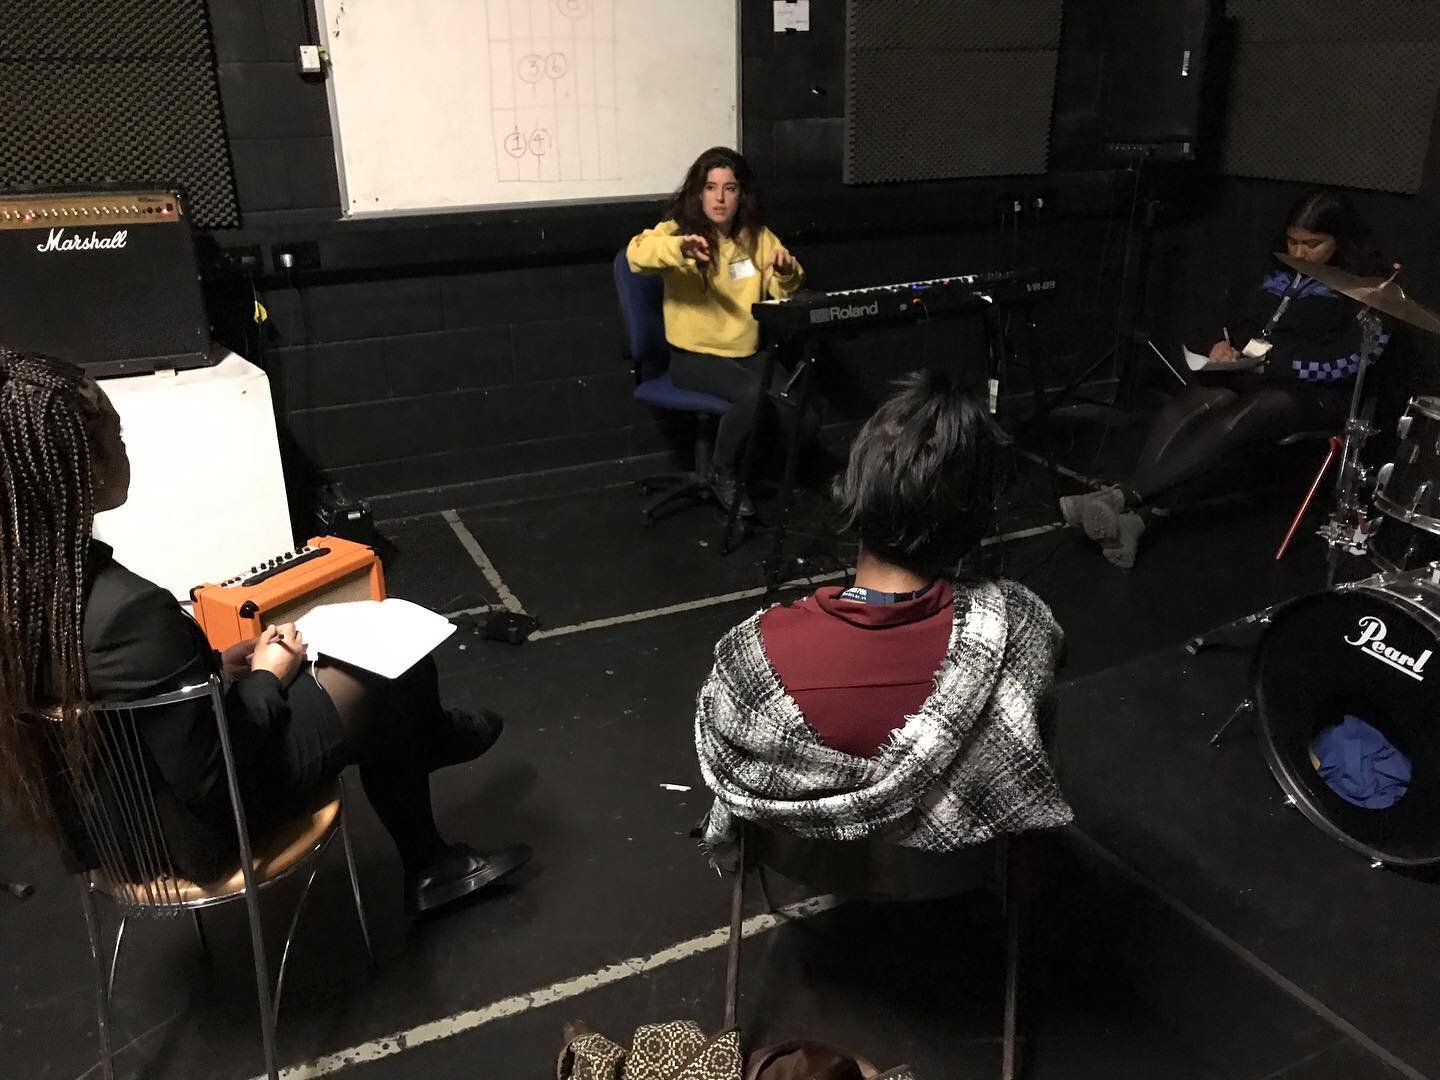 So many female artists are in the programme this term. Mega proud. Here we&rsquo;ve got the start of a moody ballad by three incredible singers #progressionsessionsuk #hackneyempire #alterego #womeninmusic